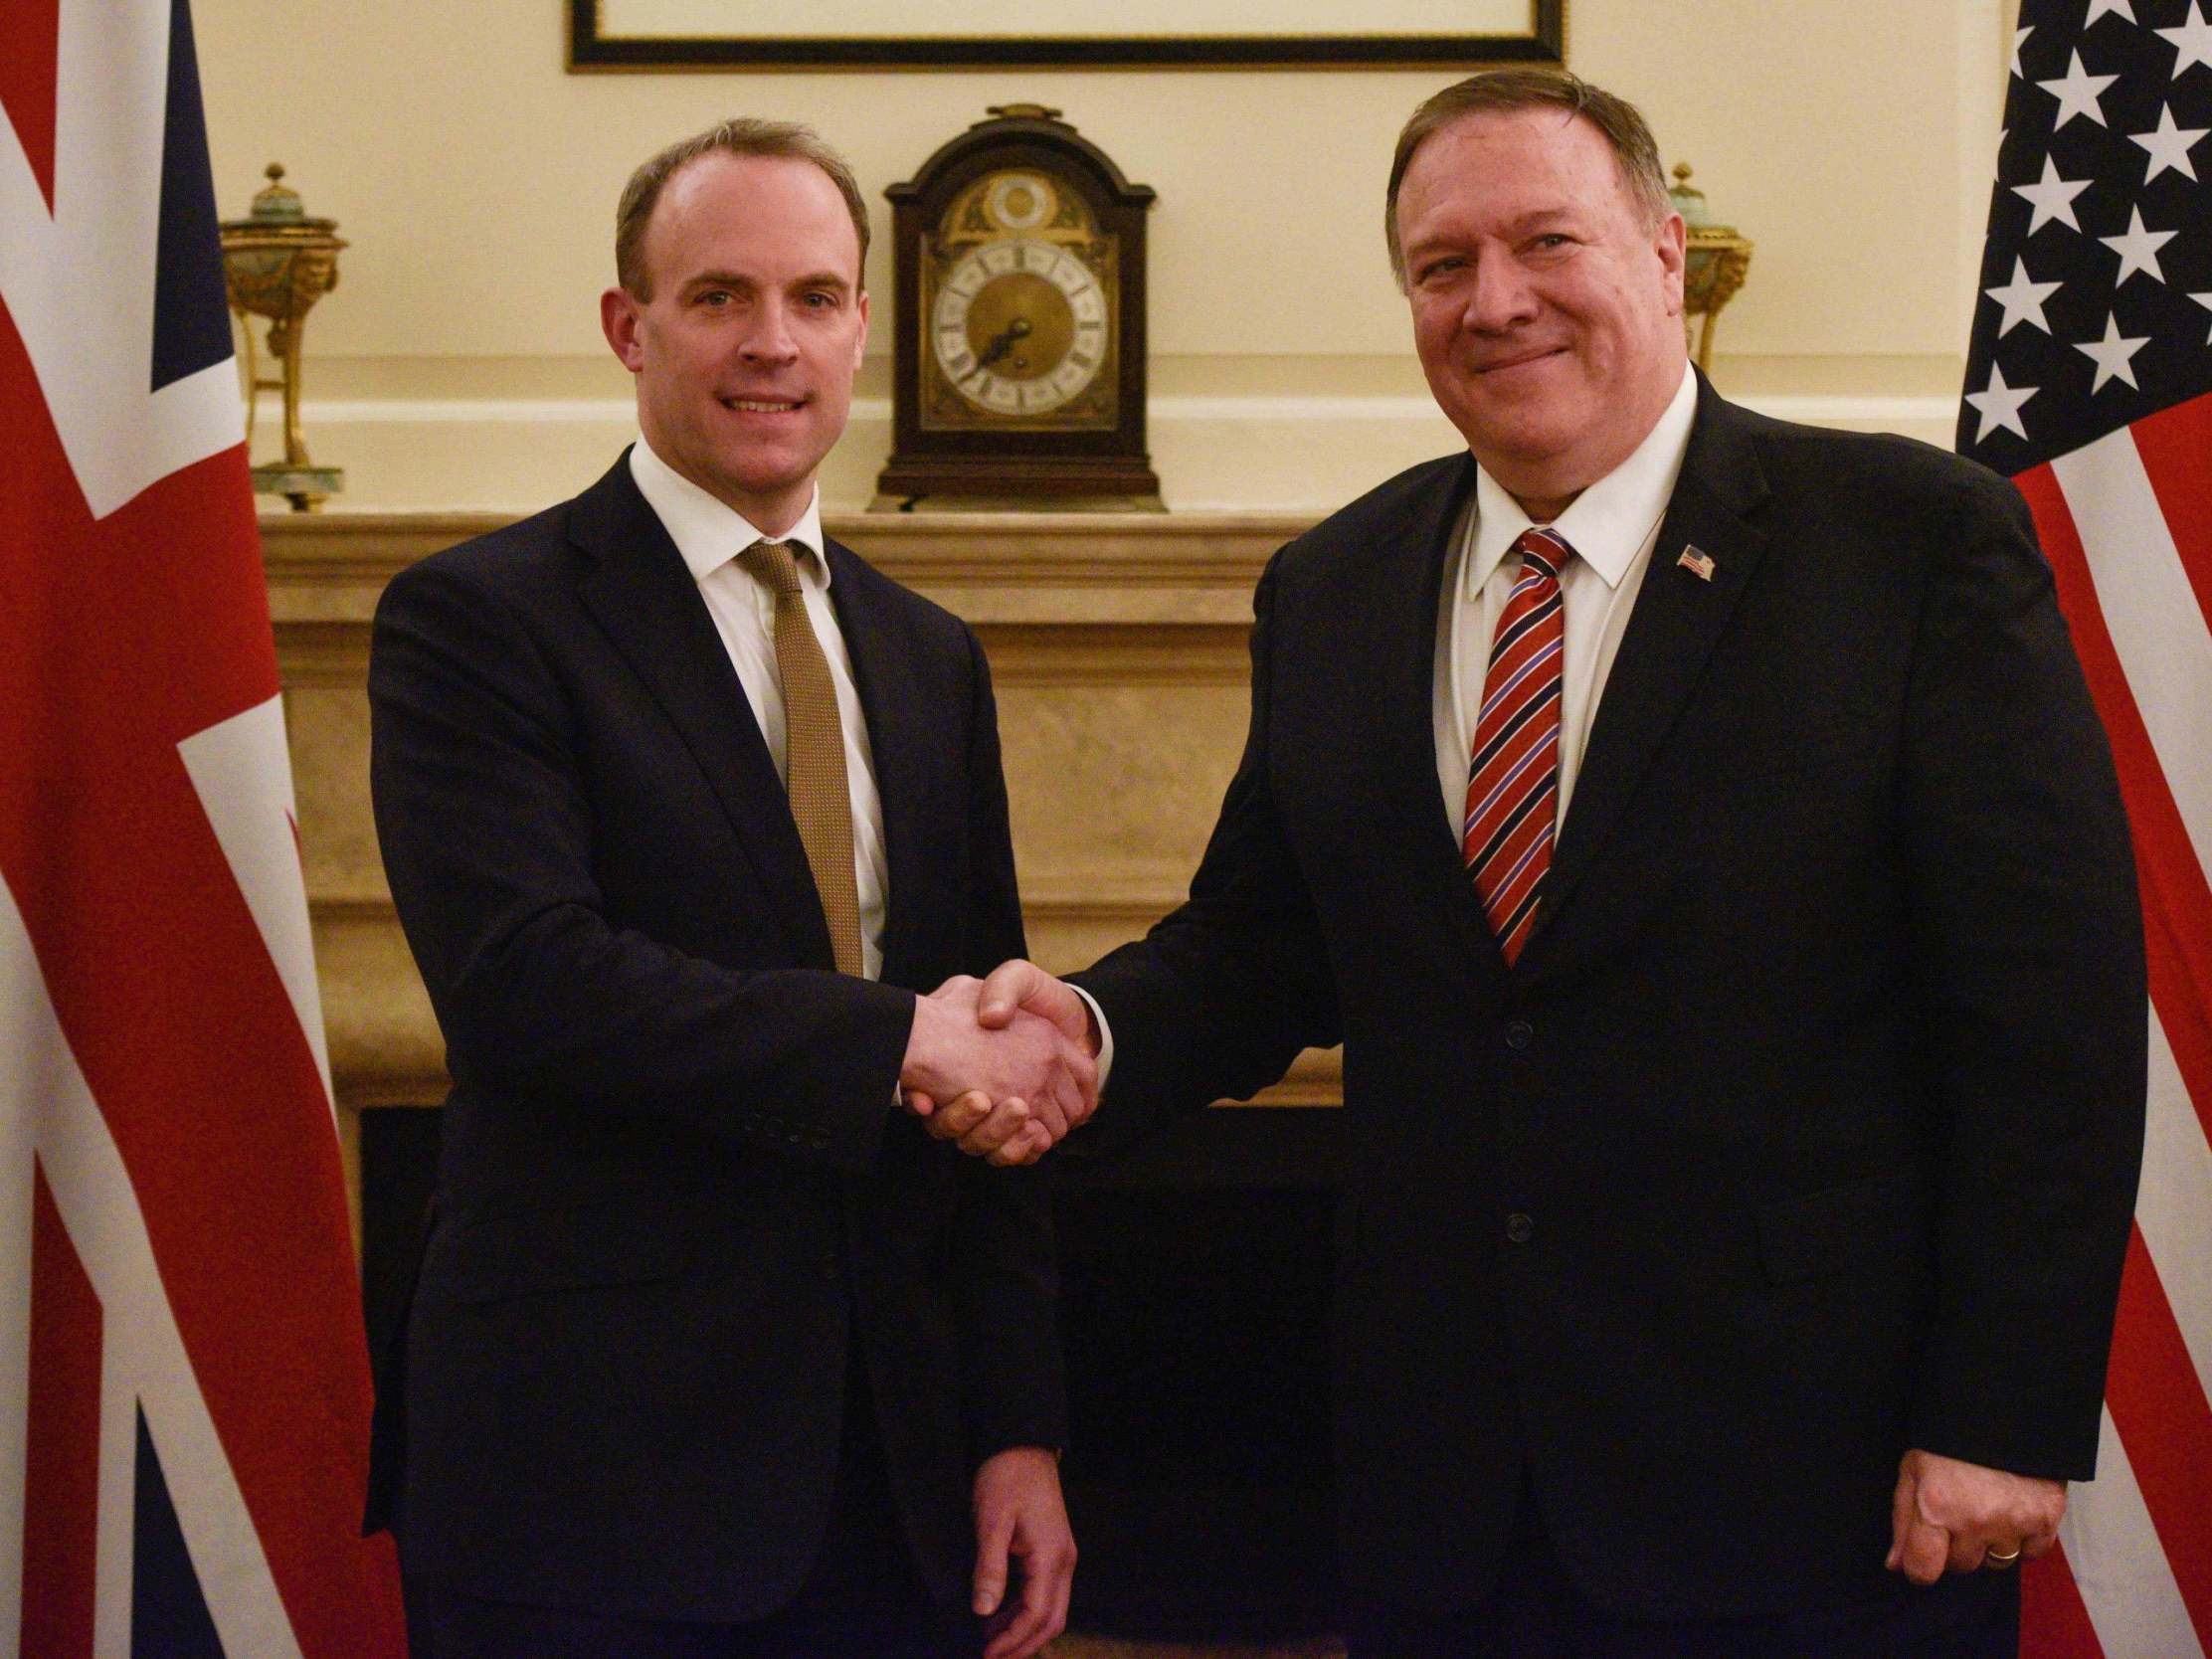 Raab and Pompeo did not agree on much